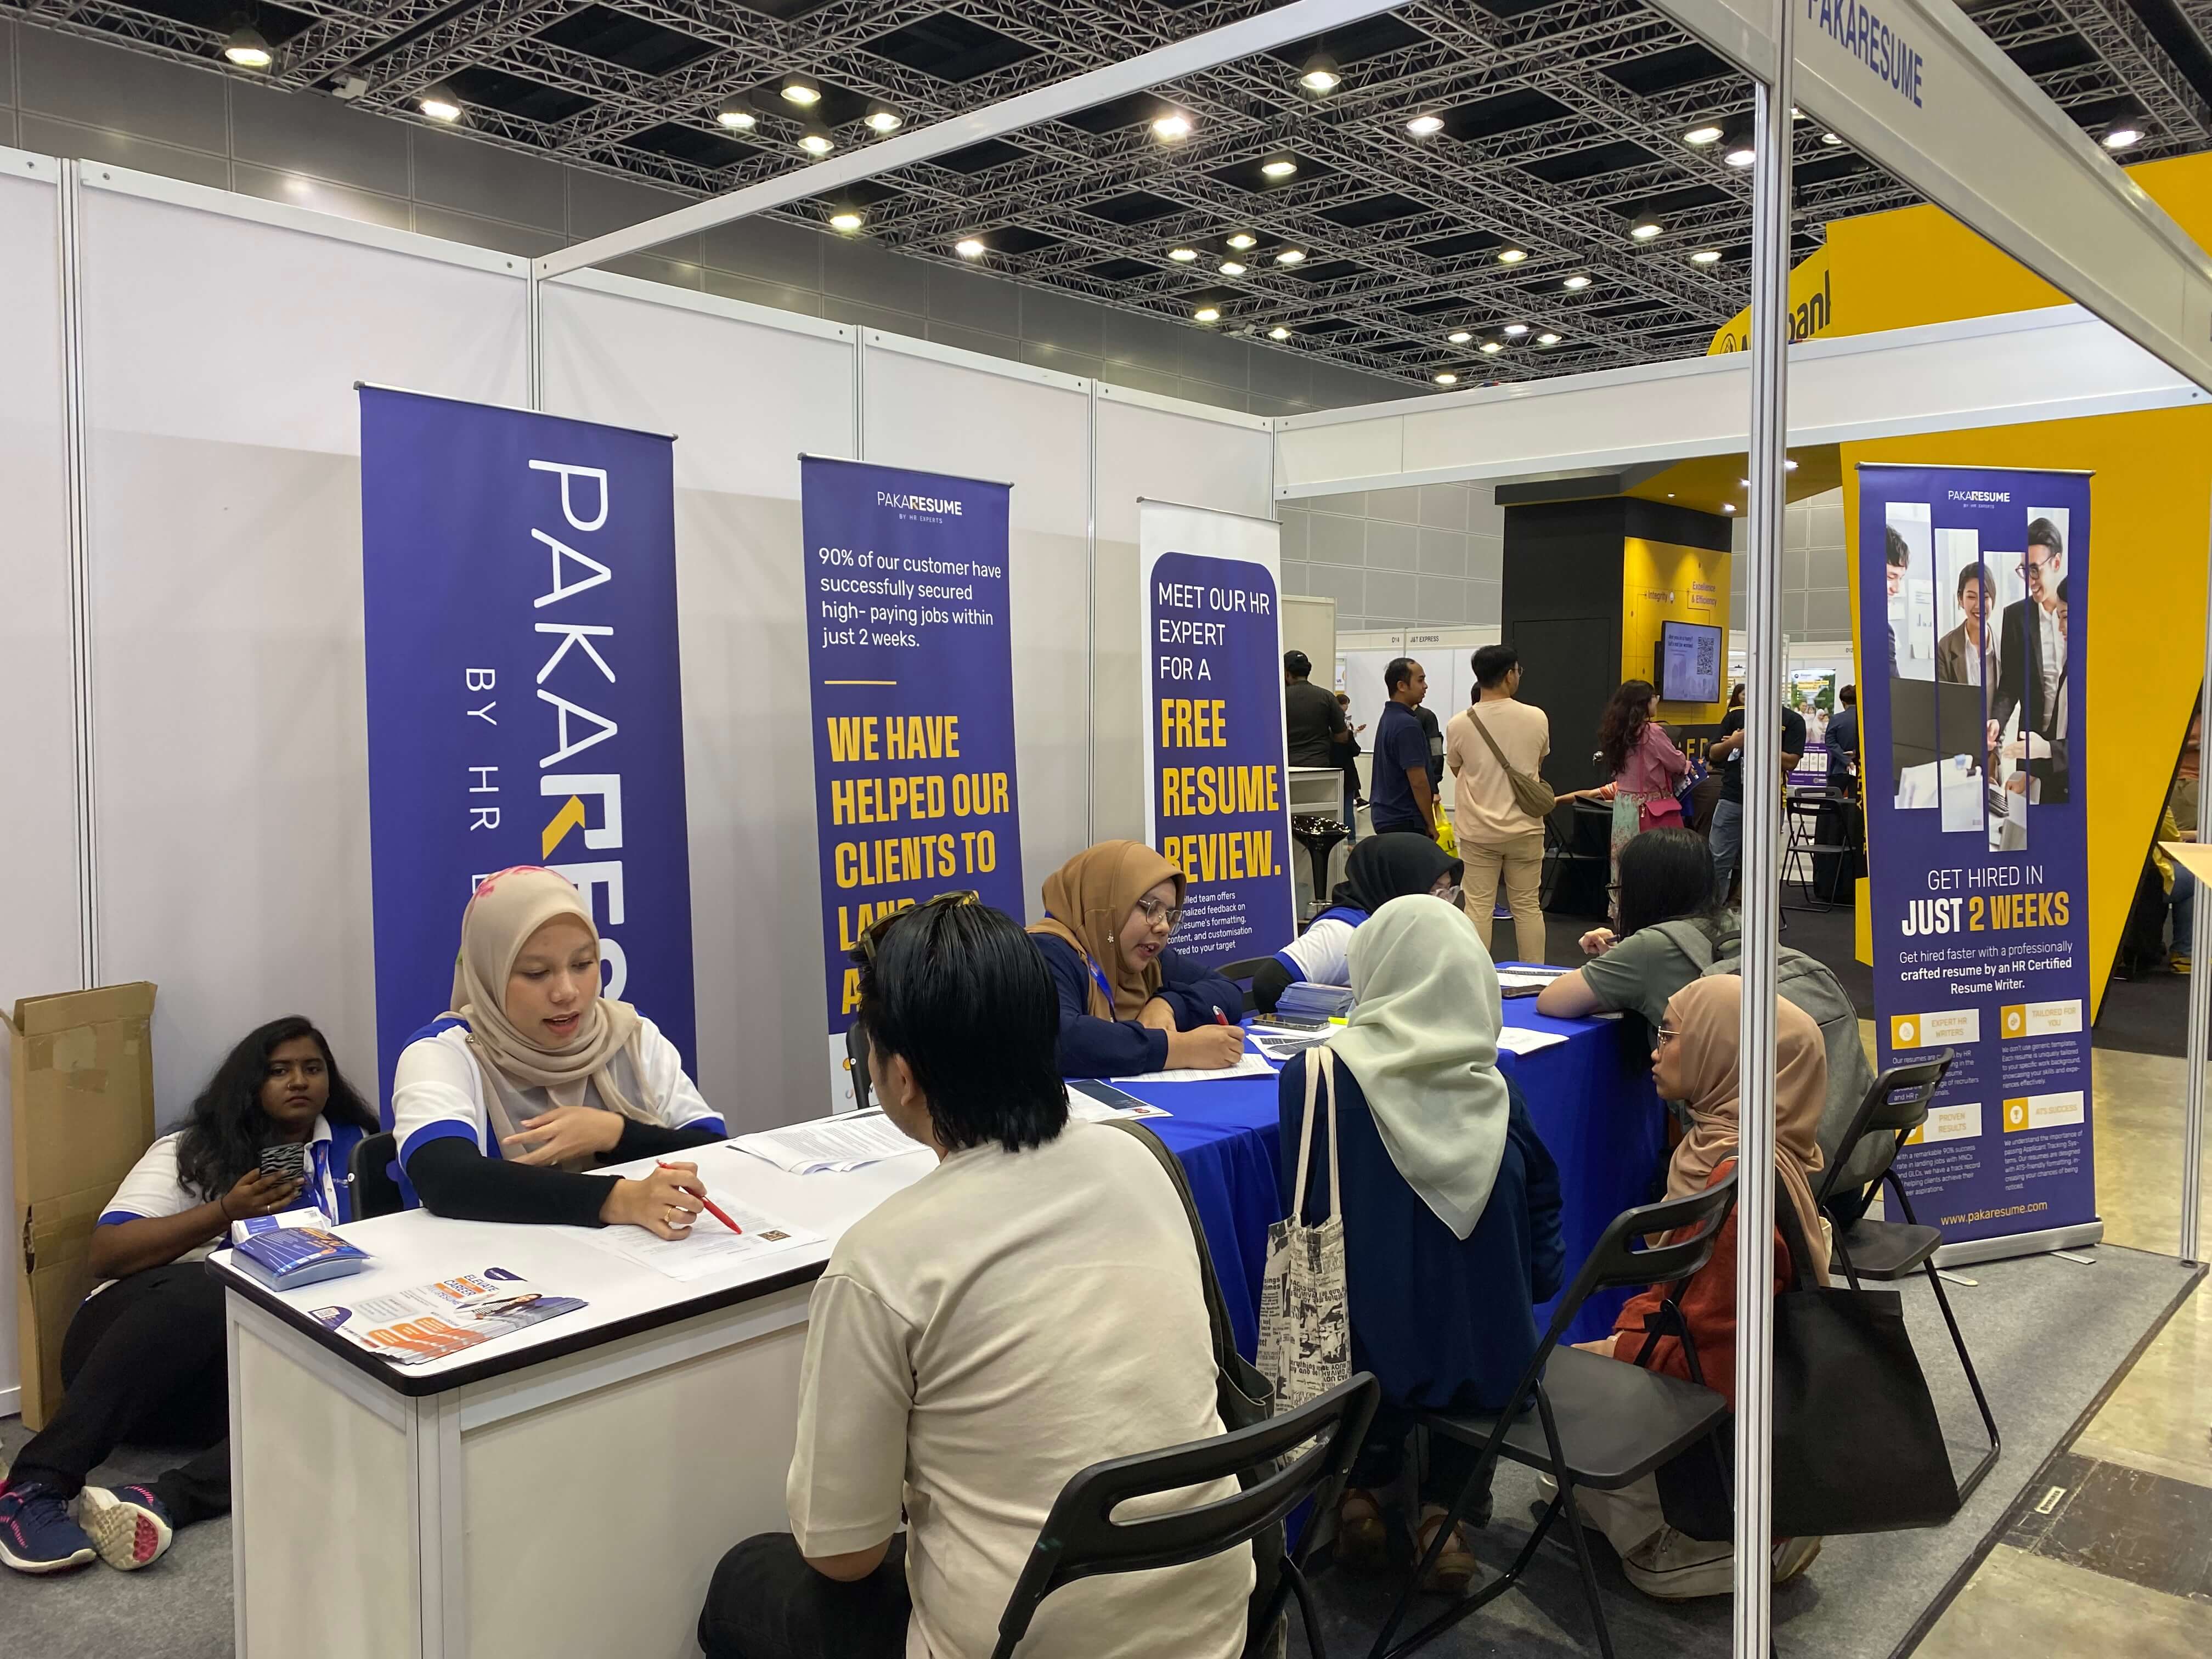 Pakaresume - By HR Experts booth @ Jobstore Mycareerfair on 23 & 24 March 2023 @ Kuala Lumpur Convention Centre